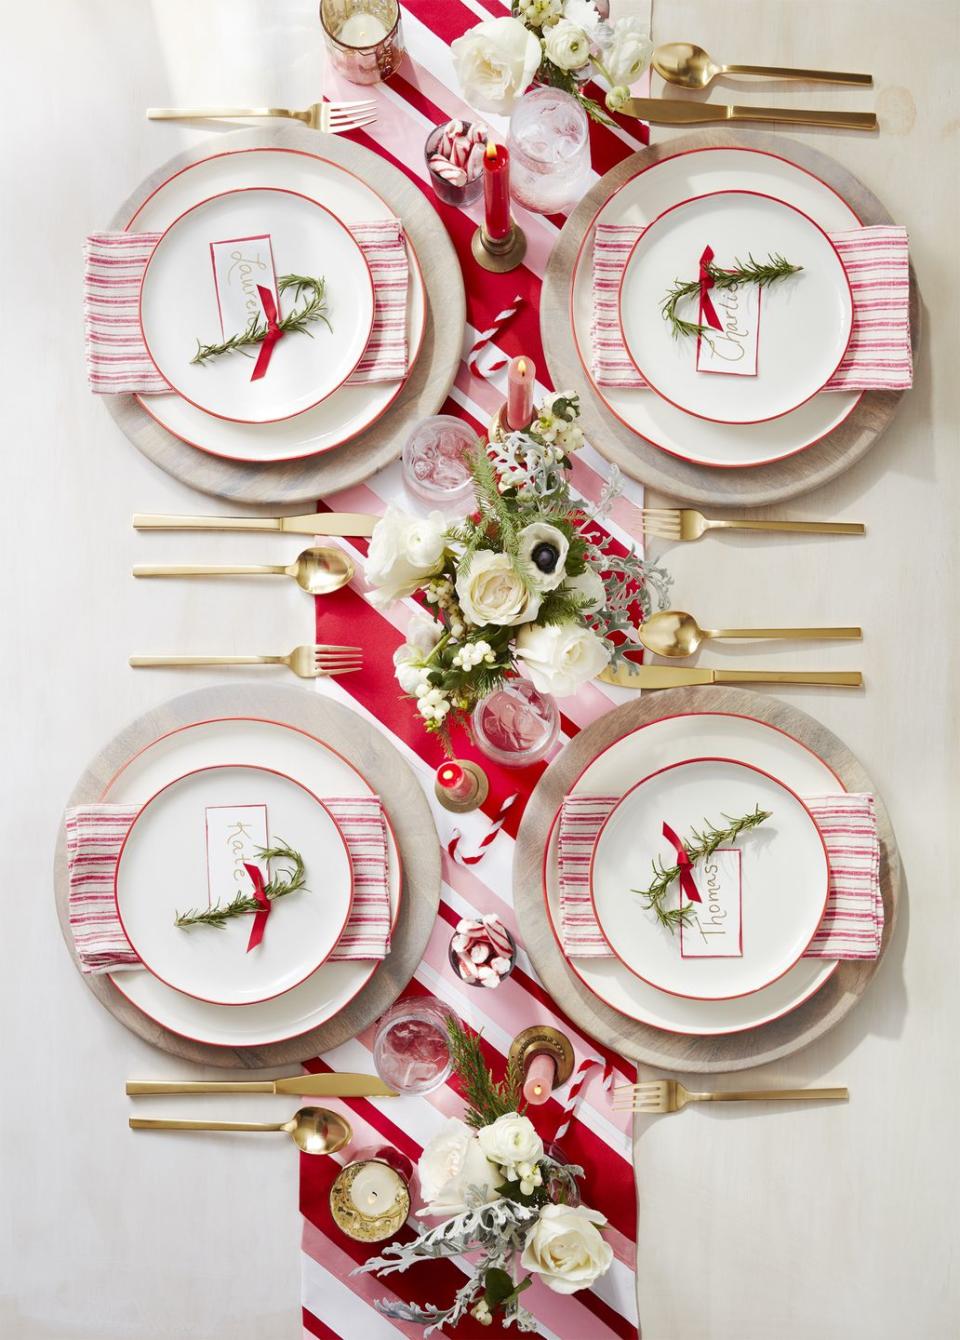 Assemble a Peppermint-Inspired Table